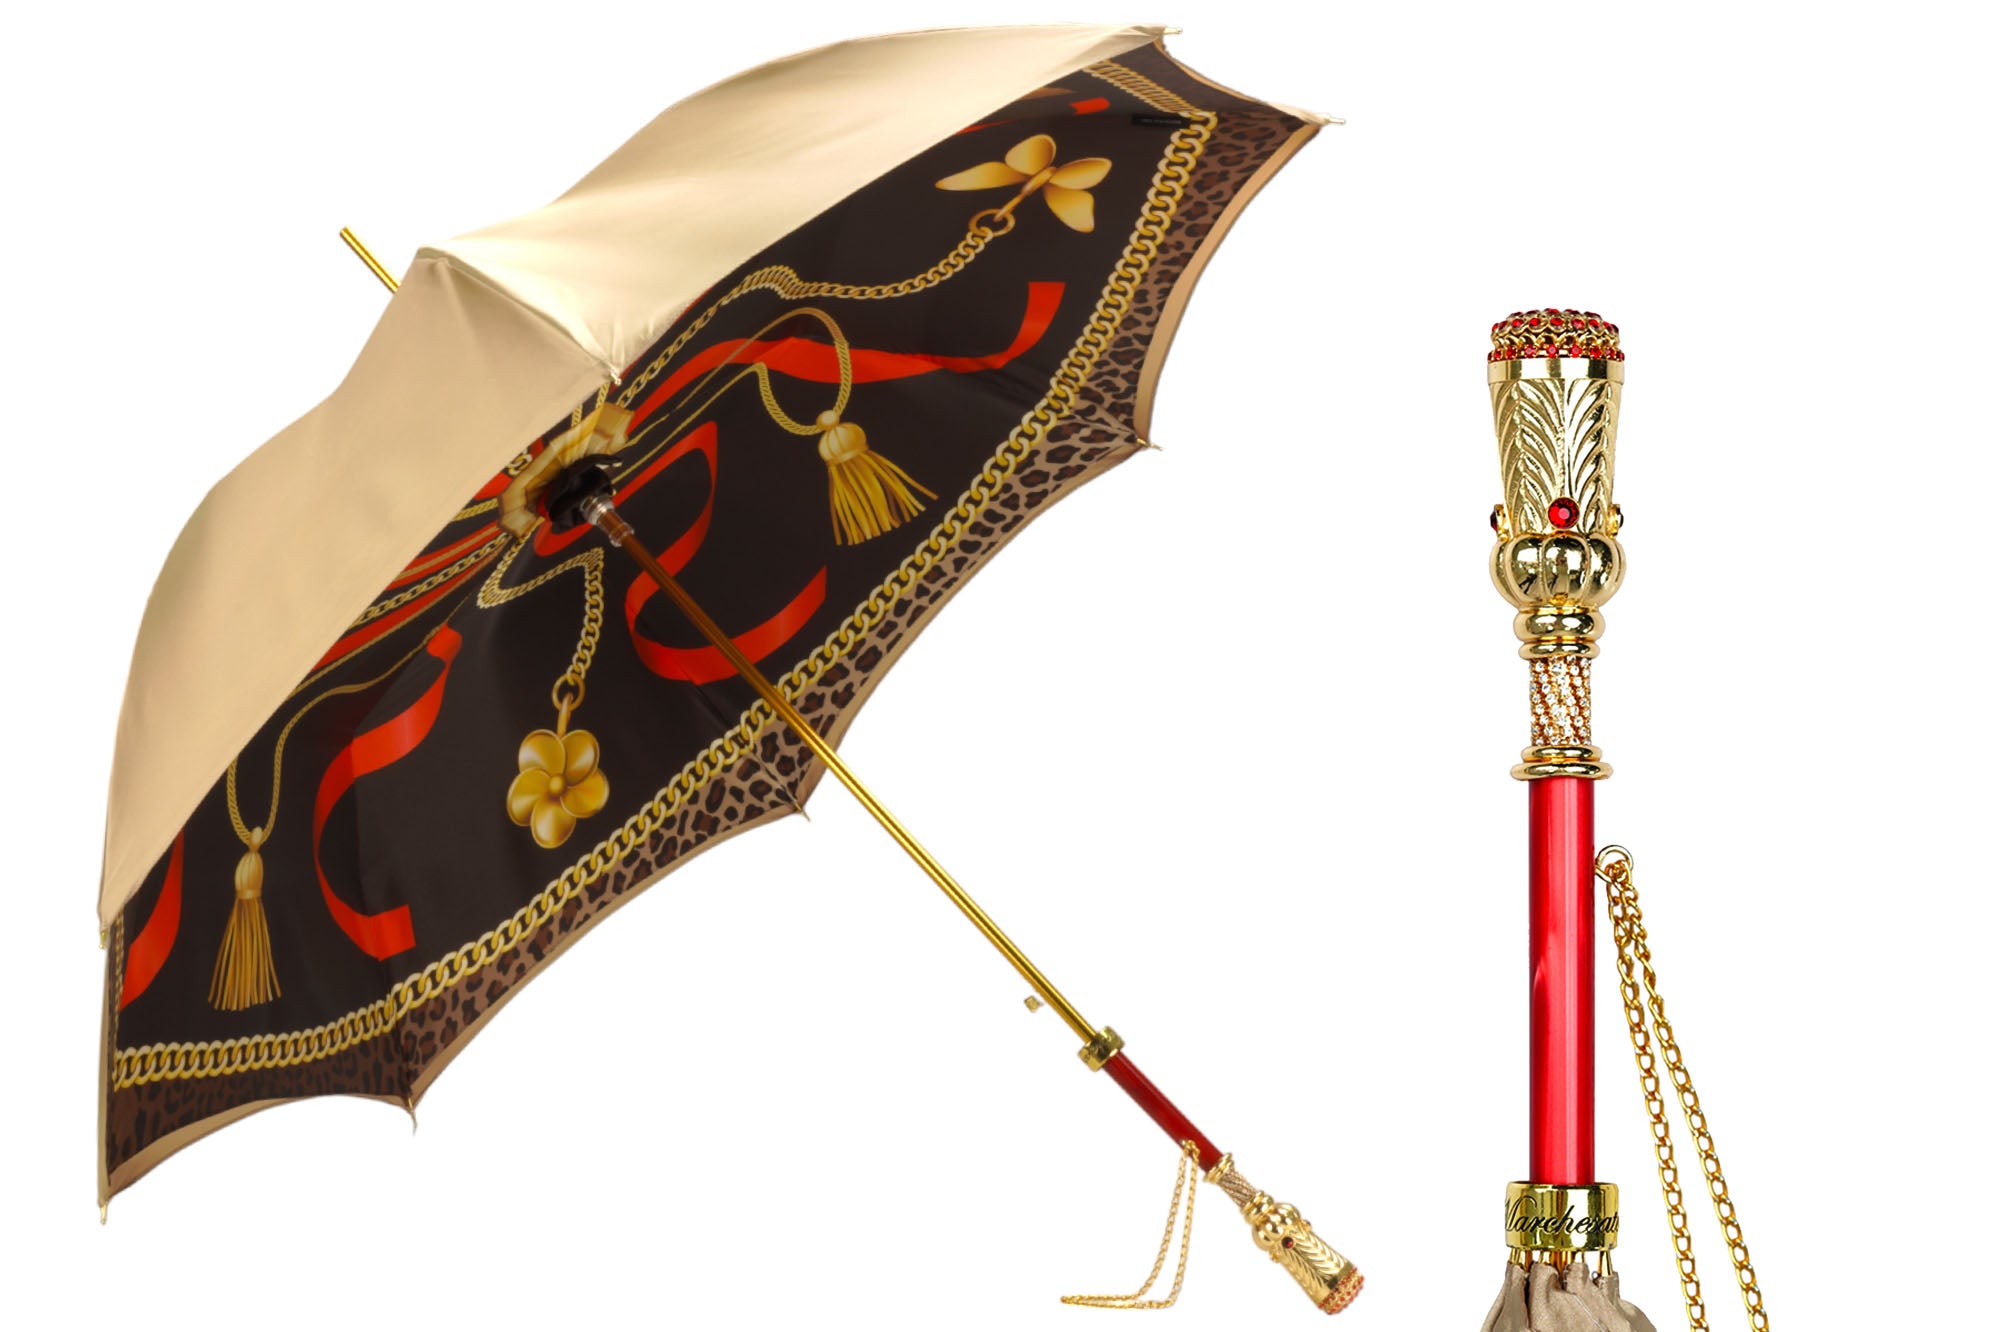 Golden Touch Umbrellas: Exquisite Artisan-Made Canopies with Crystal-Adorned Handles